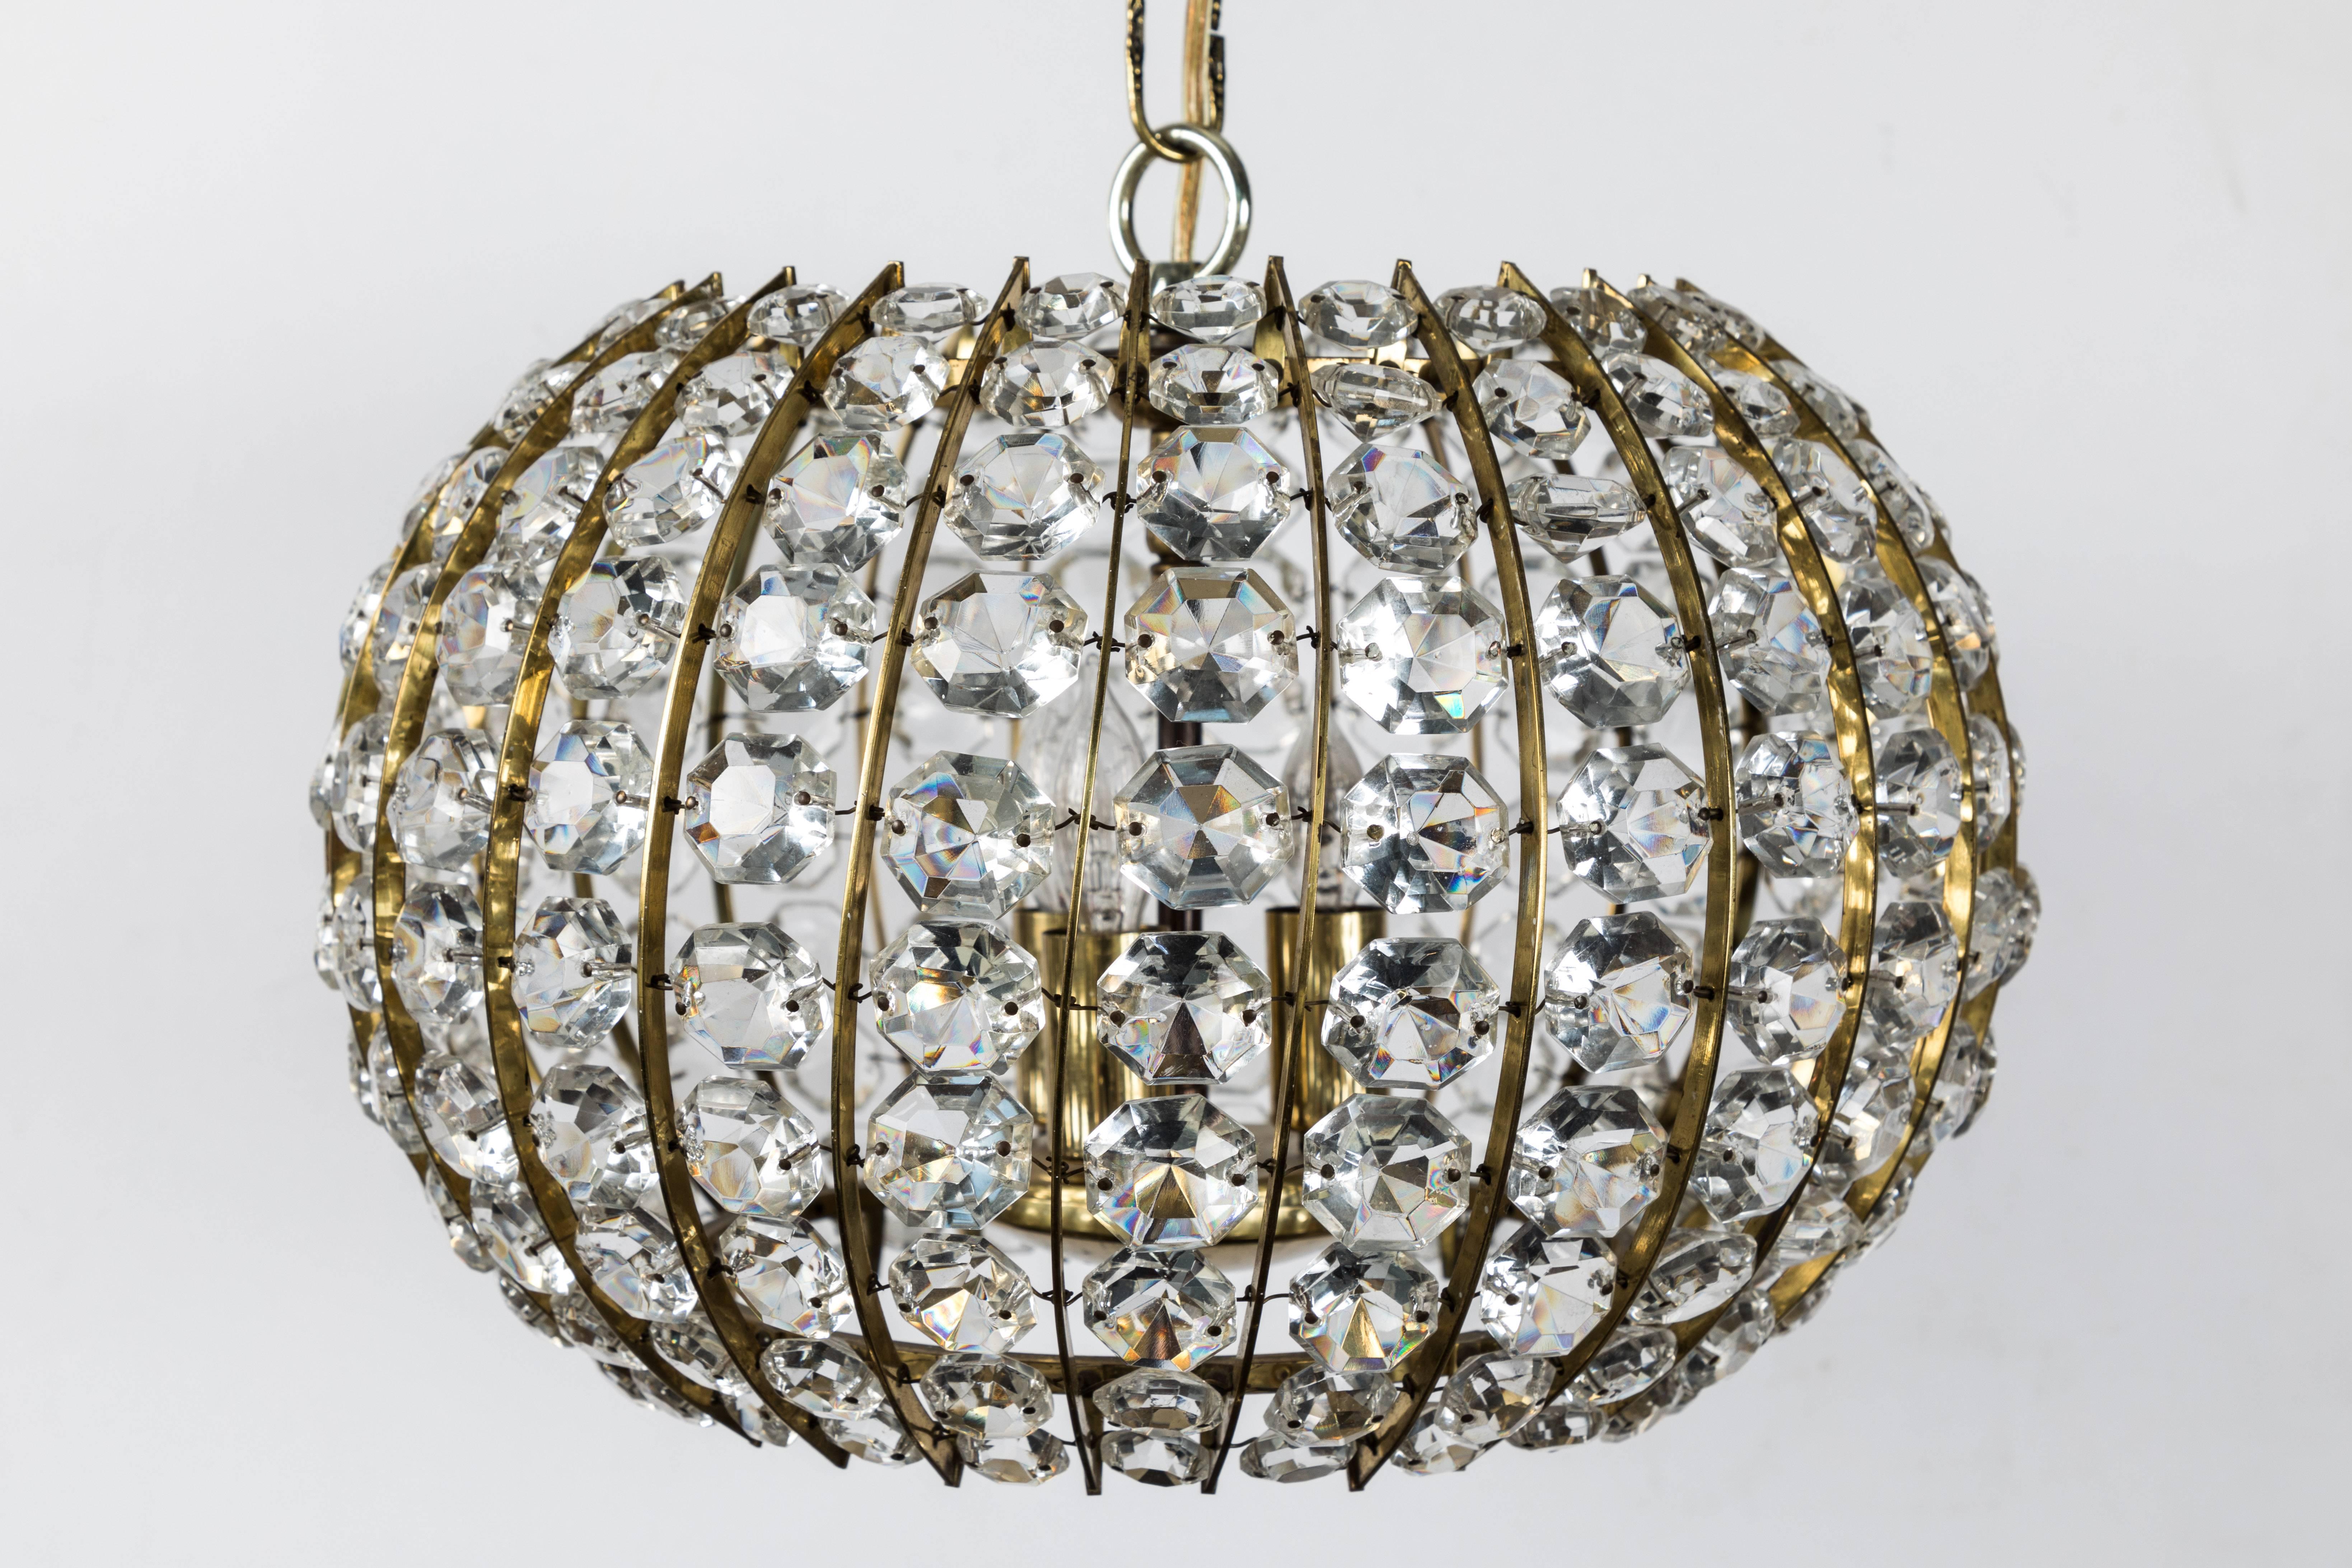 Mid-20th Century Crystal and Brass Pendant Fixture